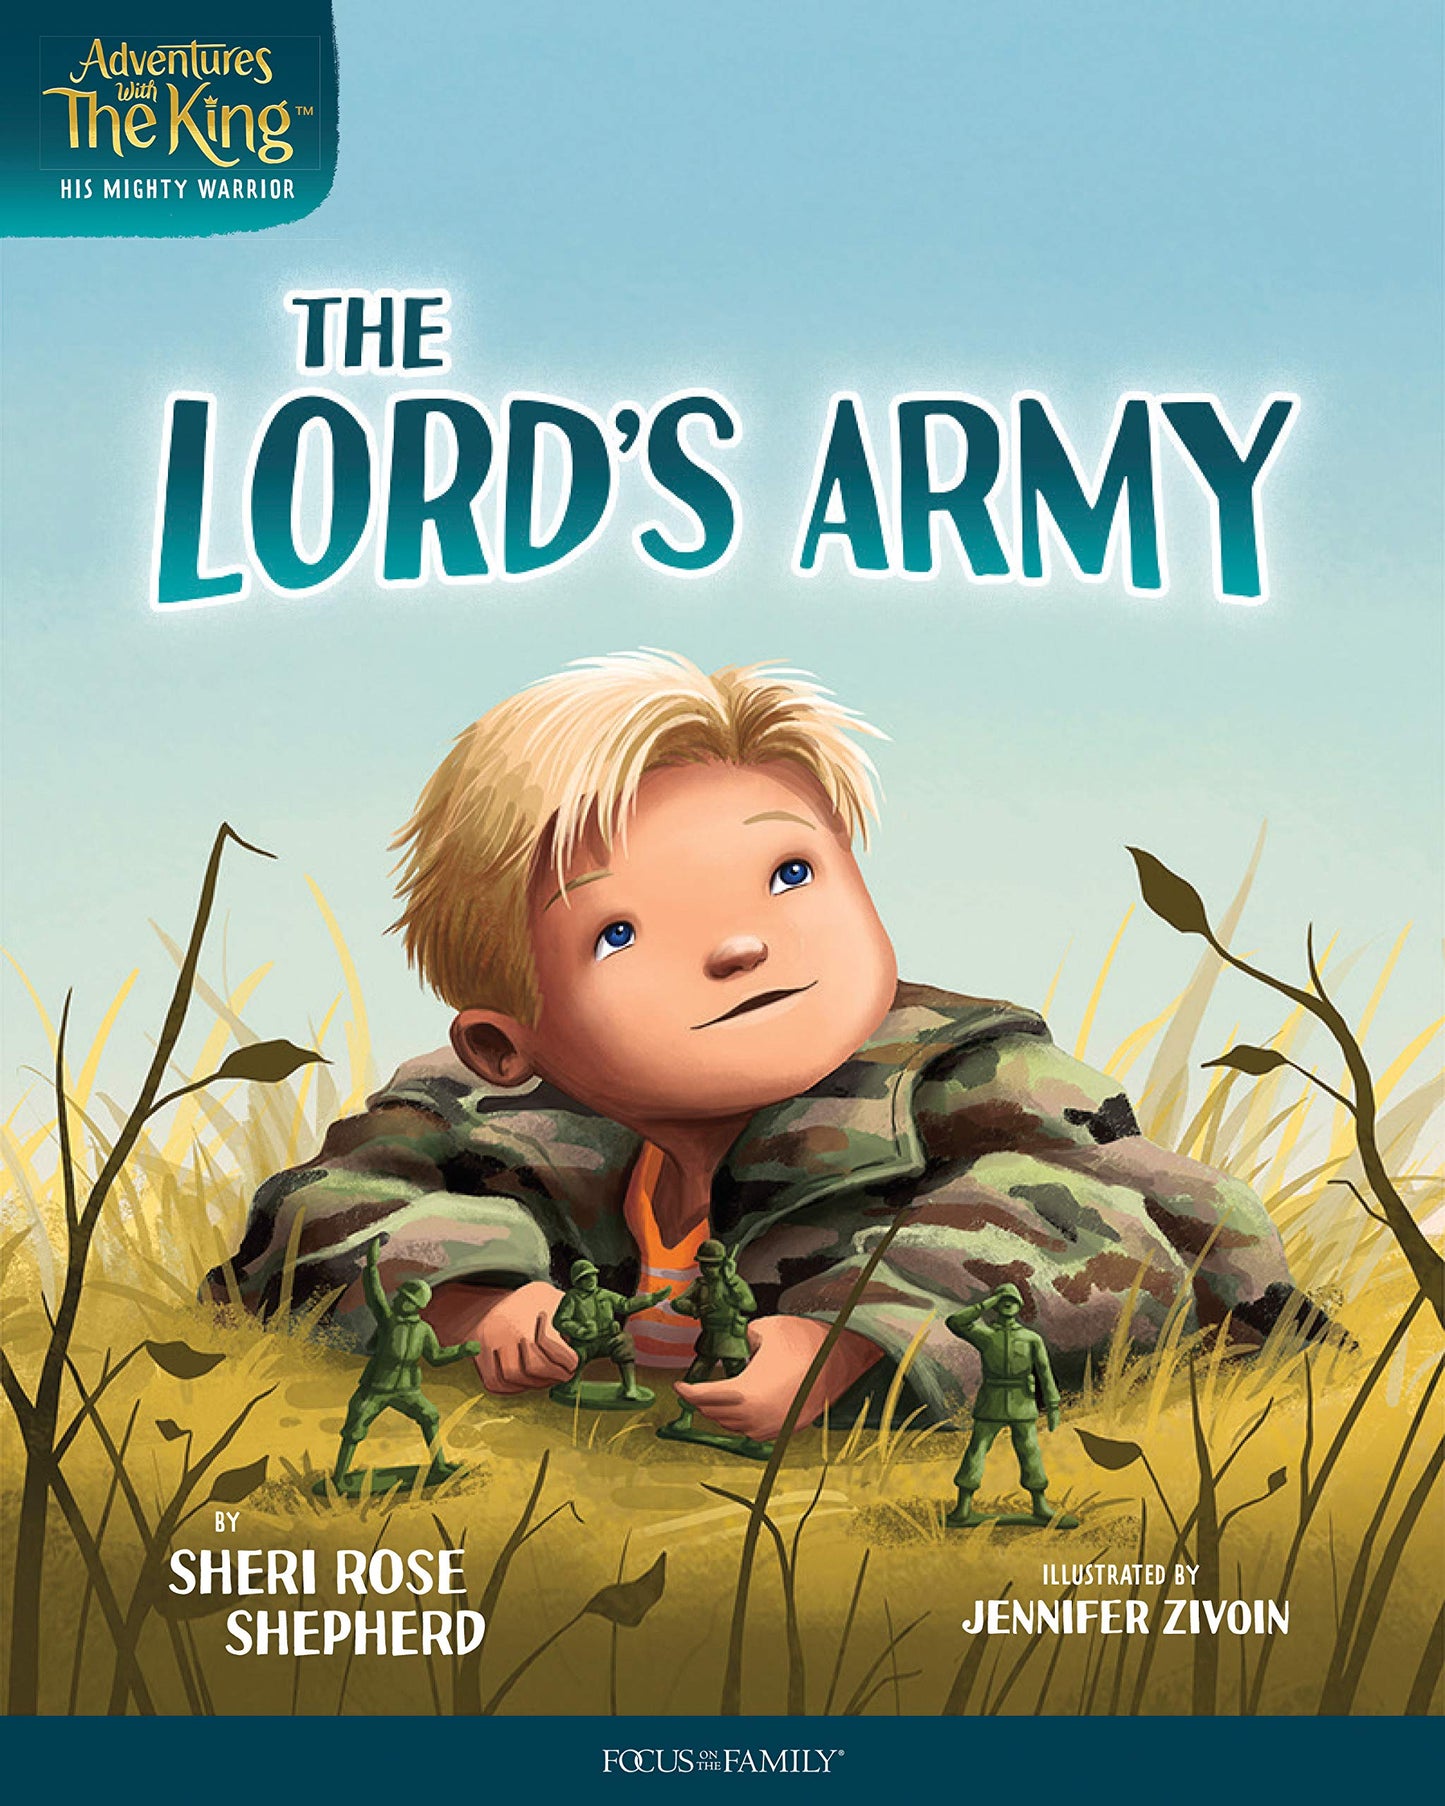 The Lord's Army (Adventures with the King: His Mighty Warrior)